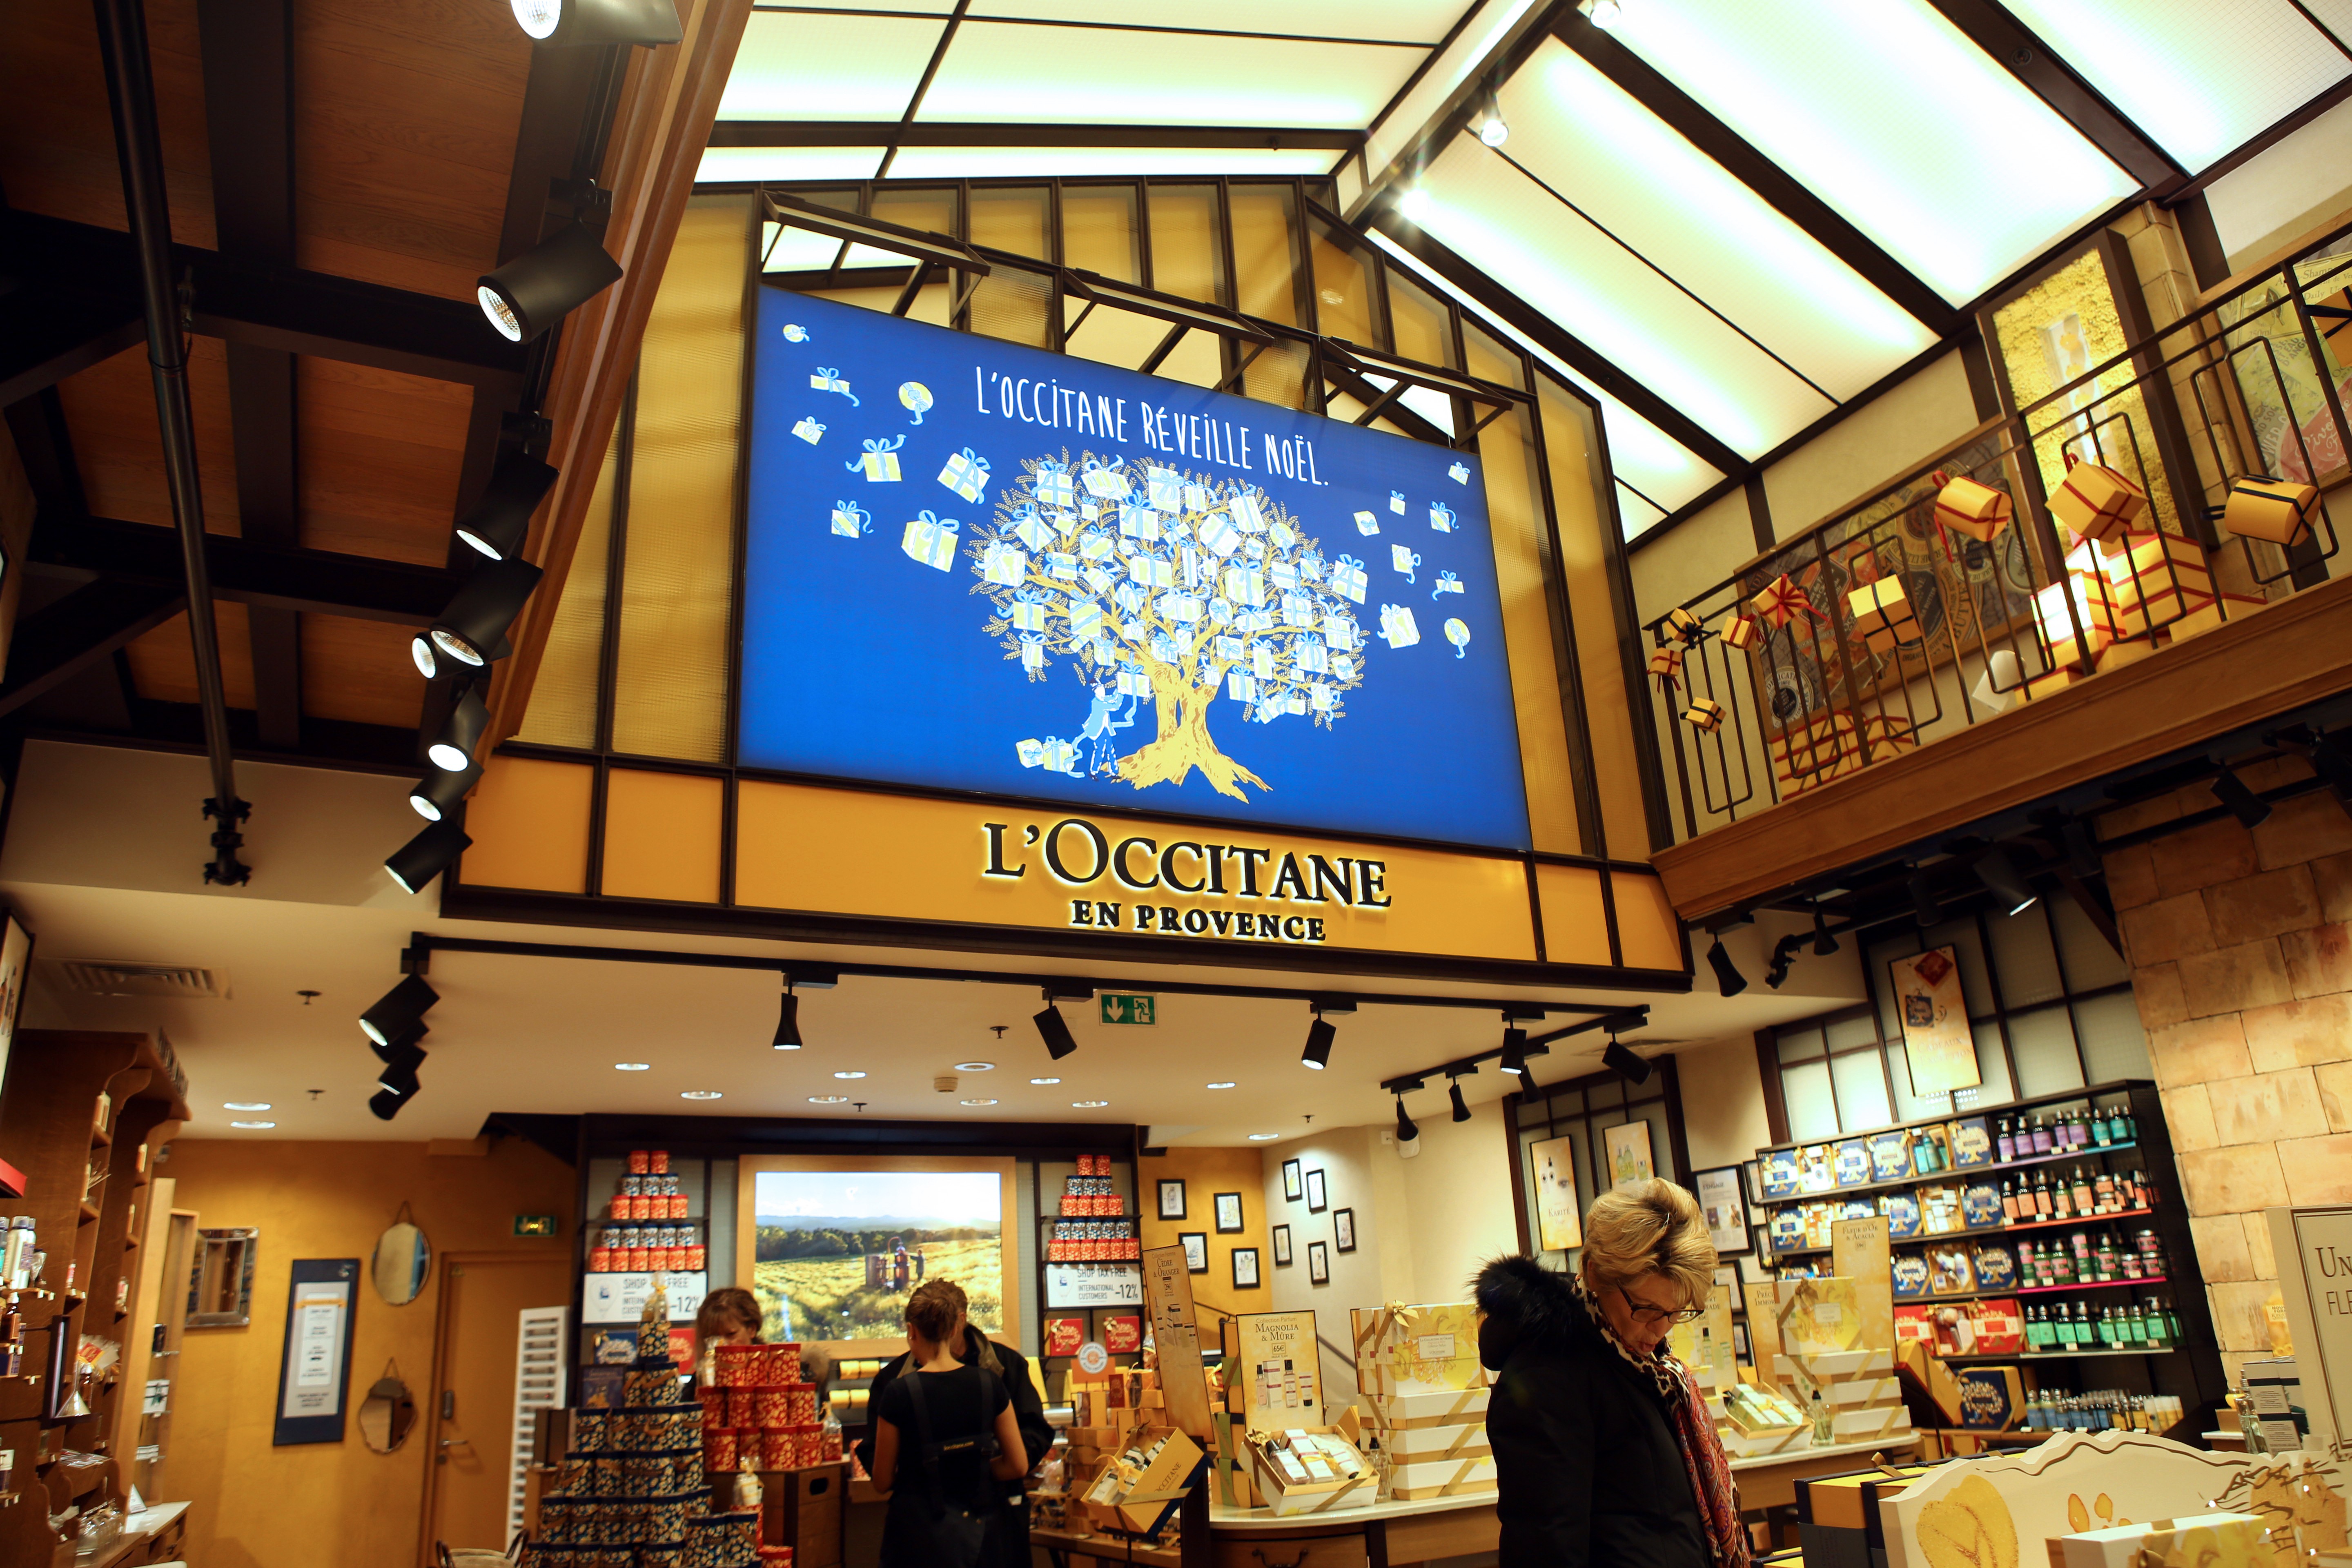 Customers shop at a L’Occitane store in Paris. The company sales in France were hurt because of protests last year. Photo: AFP